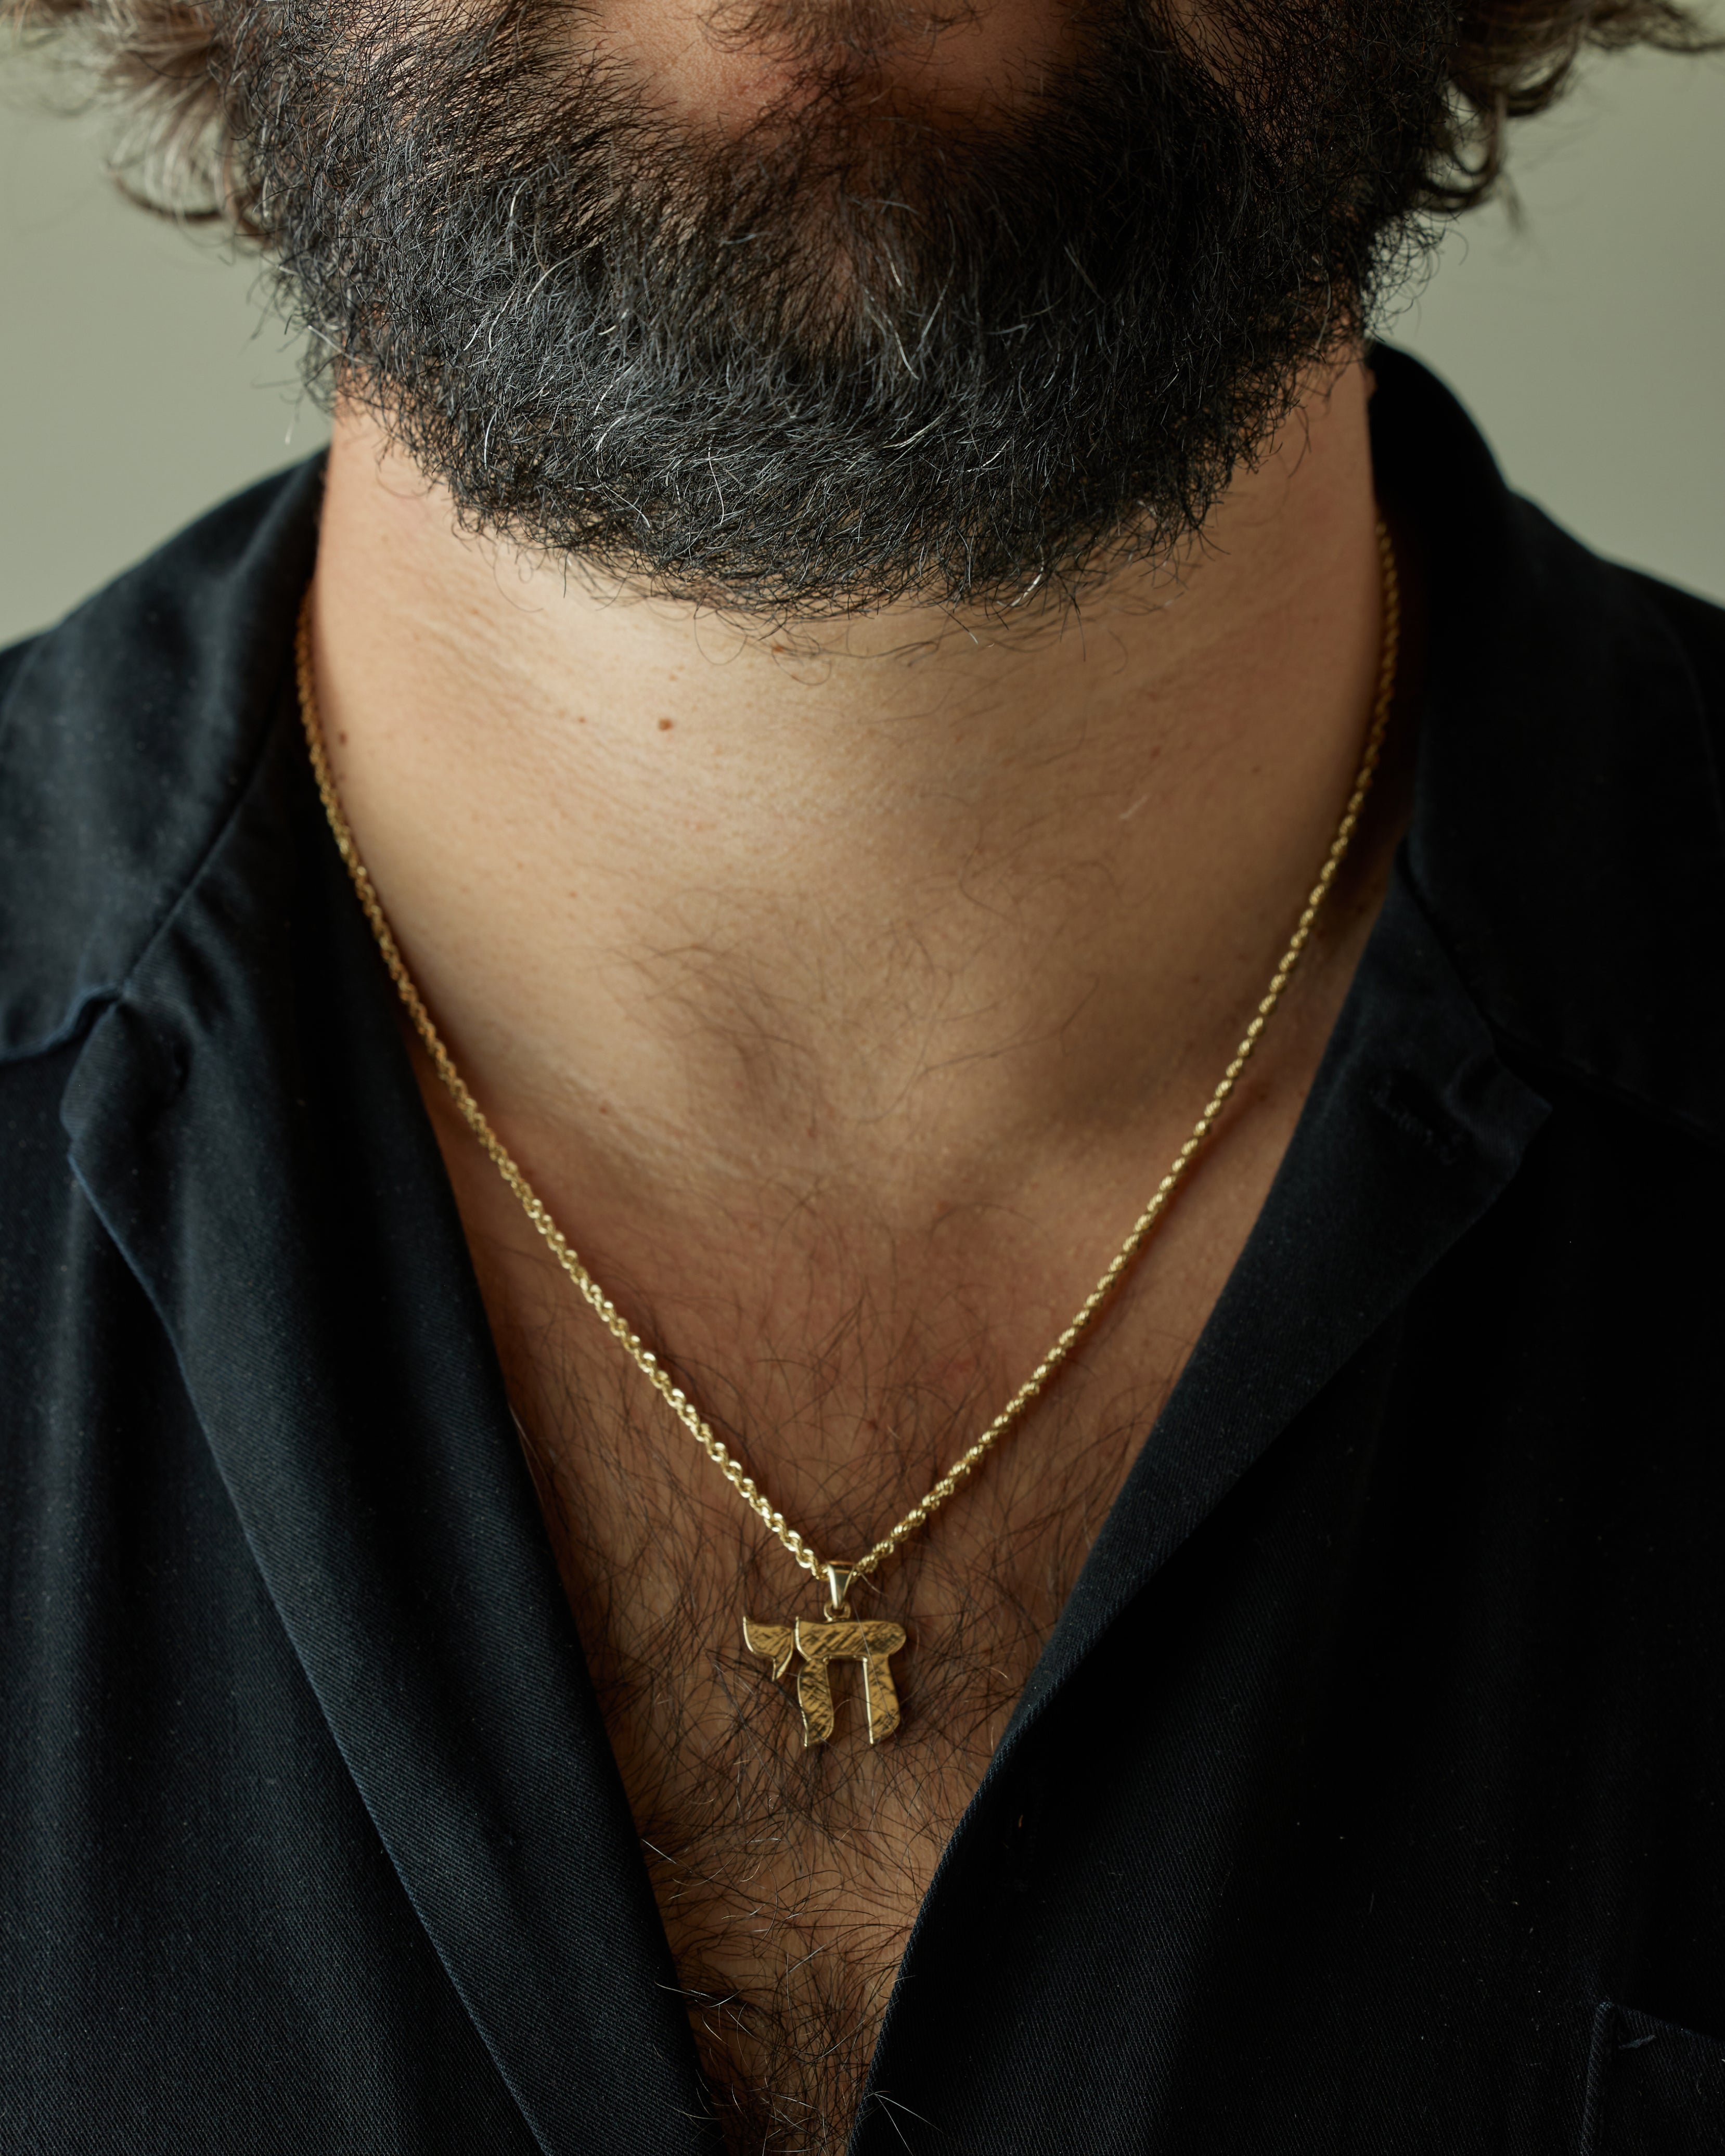 Hebrew Letter Chai Necklace - One Law One People